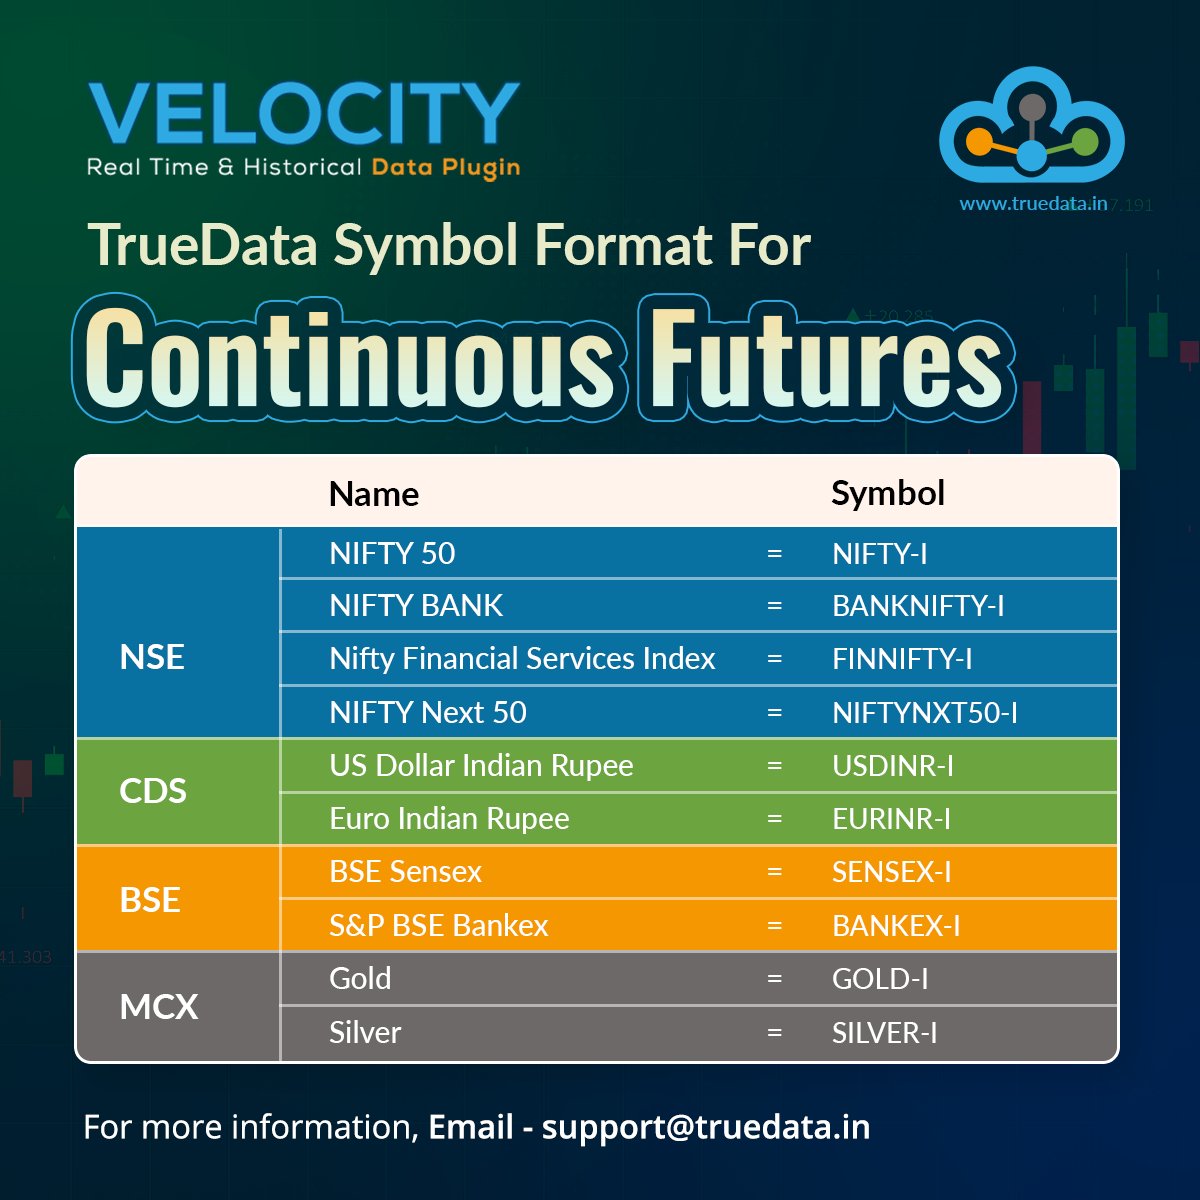 Truedata symbol format for Continuous Futures
Name                                     Symbol
NIFTY 50                               NIFTY-I
💁‍♂️ For more info Visit : bit.ly/3ydCzcO
#truedata #Velocity #RealTimeData #continuousfutures #nse #bse #mcx #cds #nifty